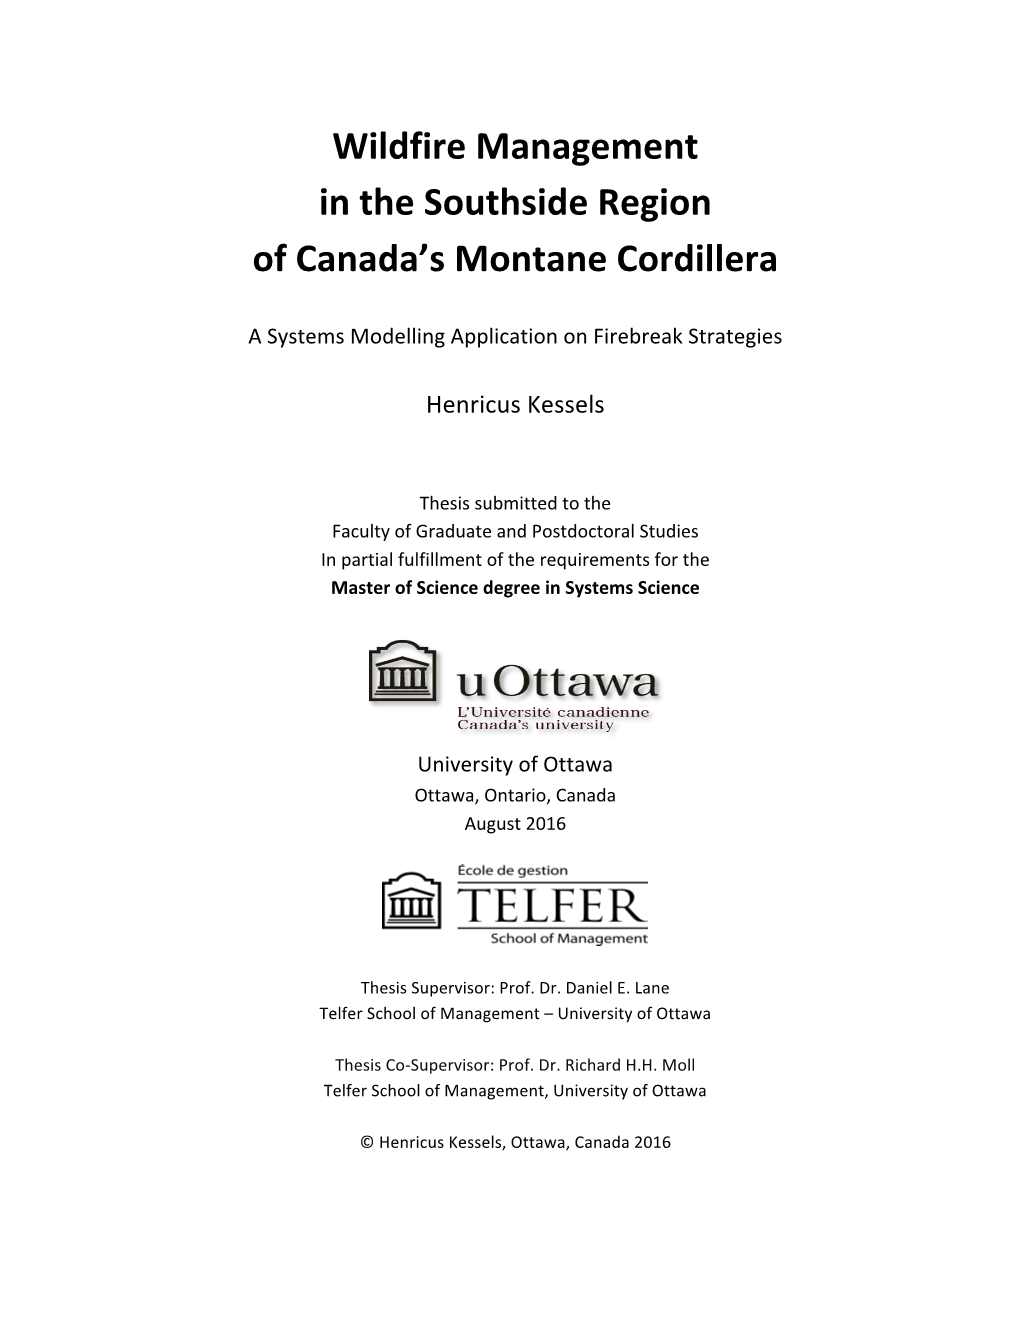 Wildfire Management in the Southside Region of Canada's Montane